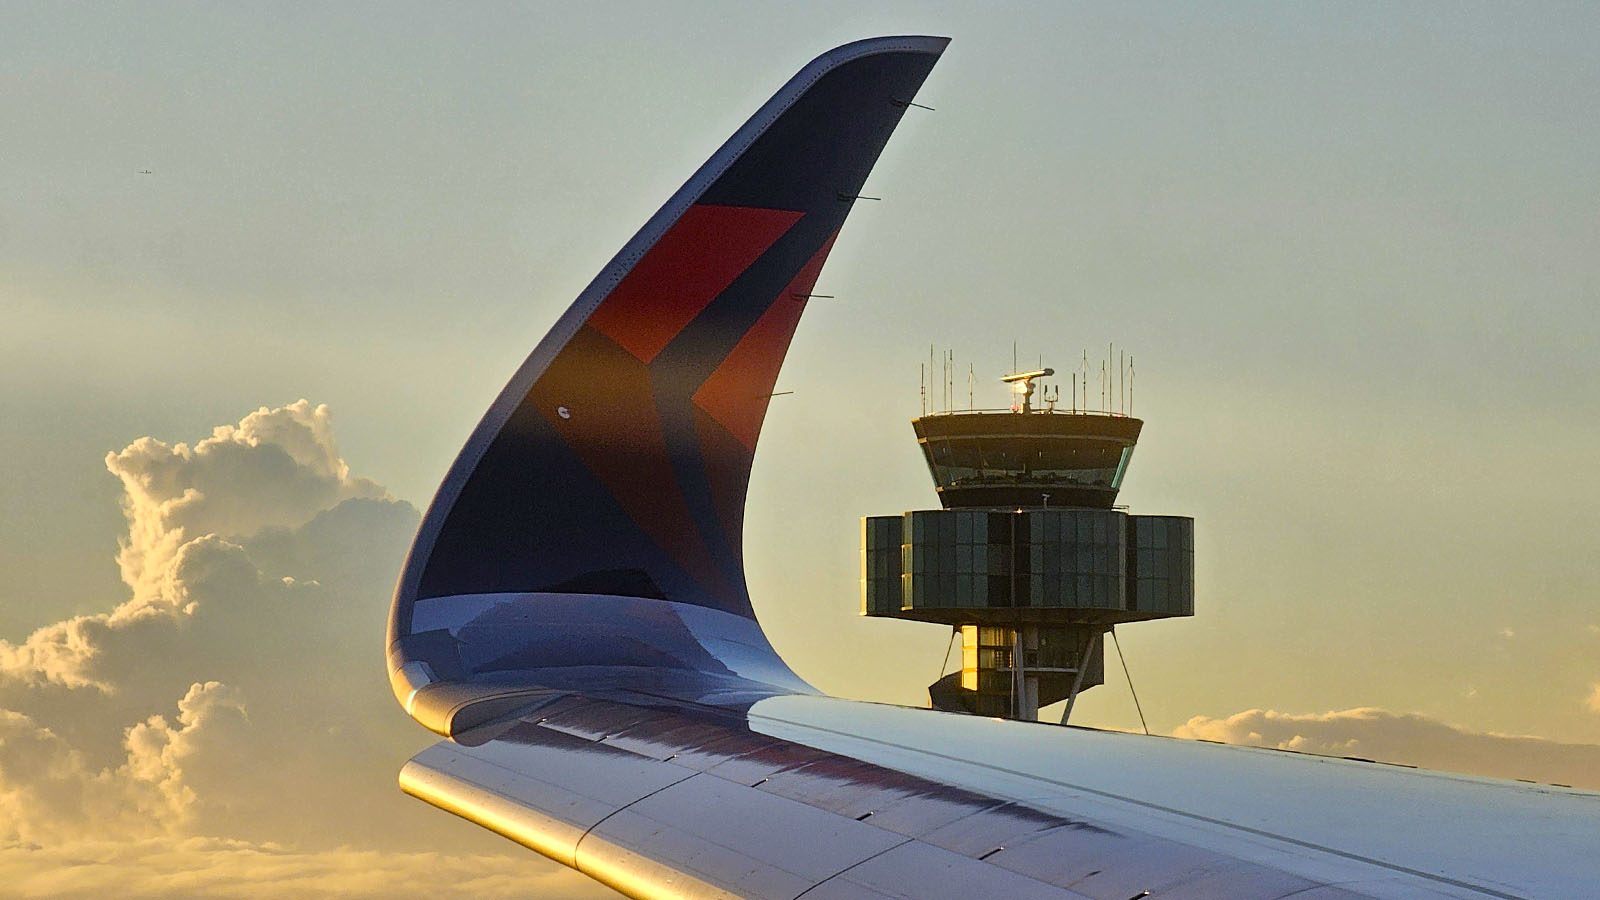 Control tower and winglet from Delta One on the Airbus A350